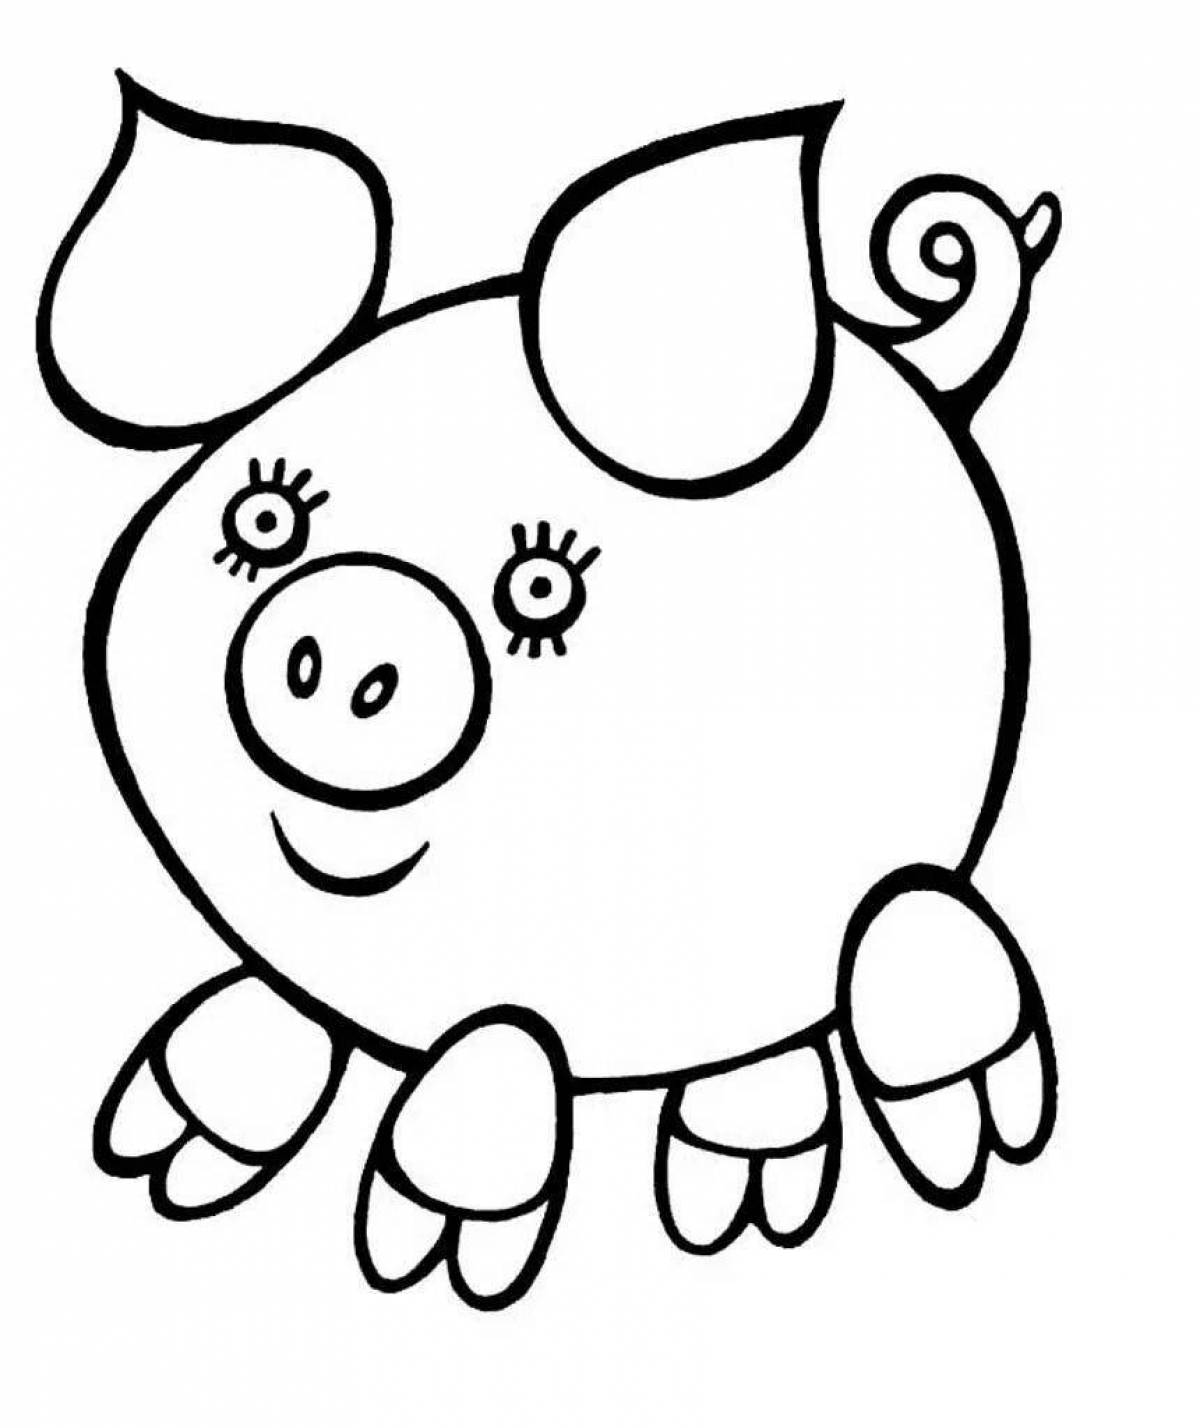 Amazing pig coloring book for kids